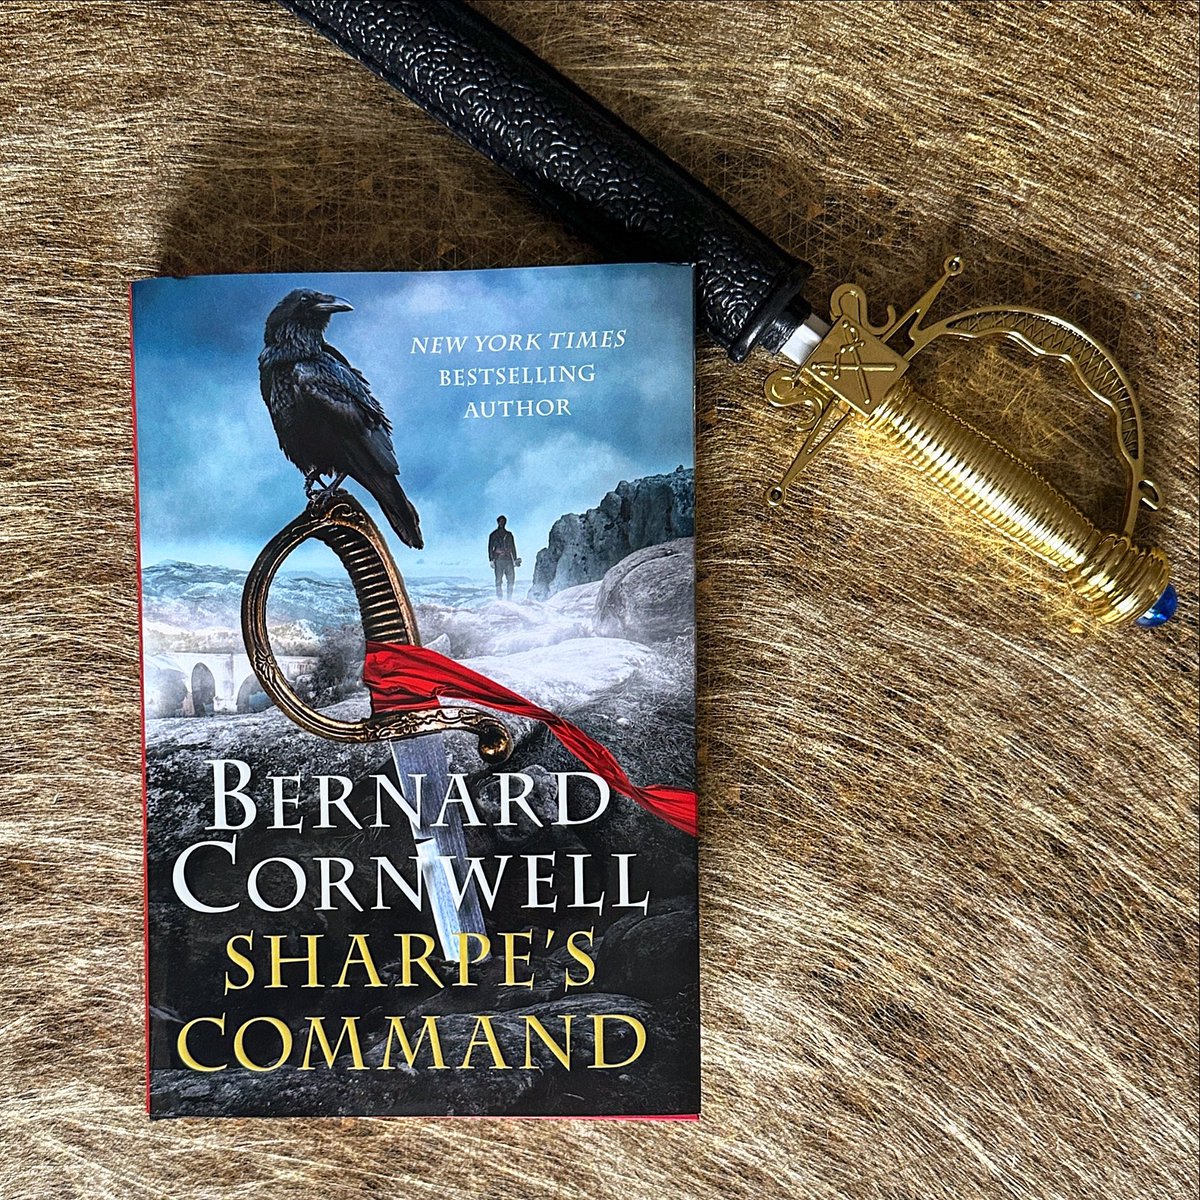 Dive back into the heart of the 19th century with Bernard Cornwell’s latest masterpiece in the Sharpe series, SHARPE’S COMMAND! Will courage and cunning be enough to change the course of Europe? 🌍⚔️ Find out in this epic tale of bravery, battles, and bloodshed. On sale now!